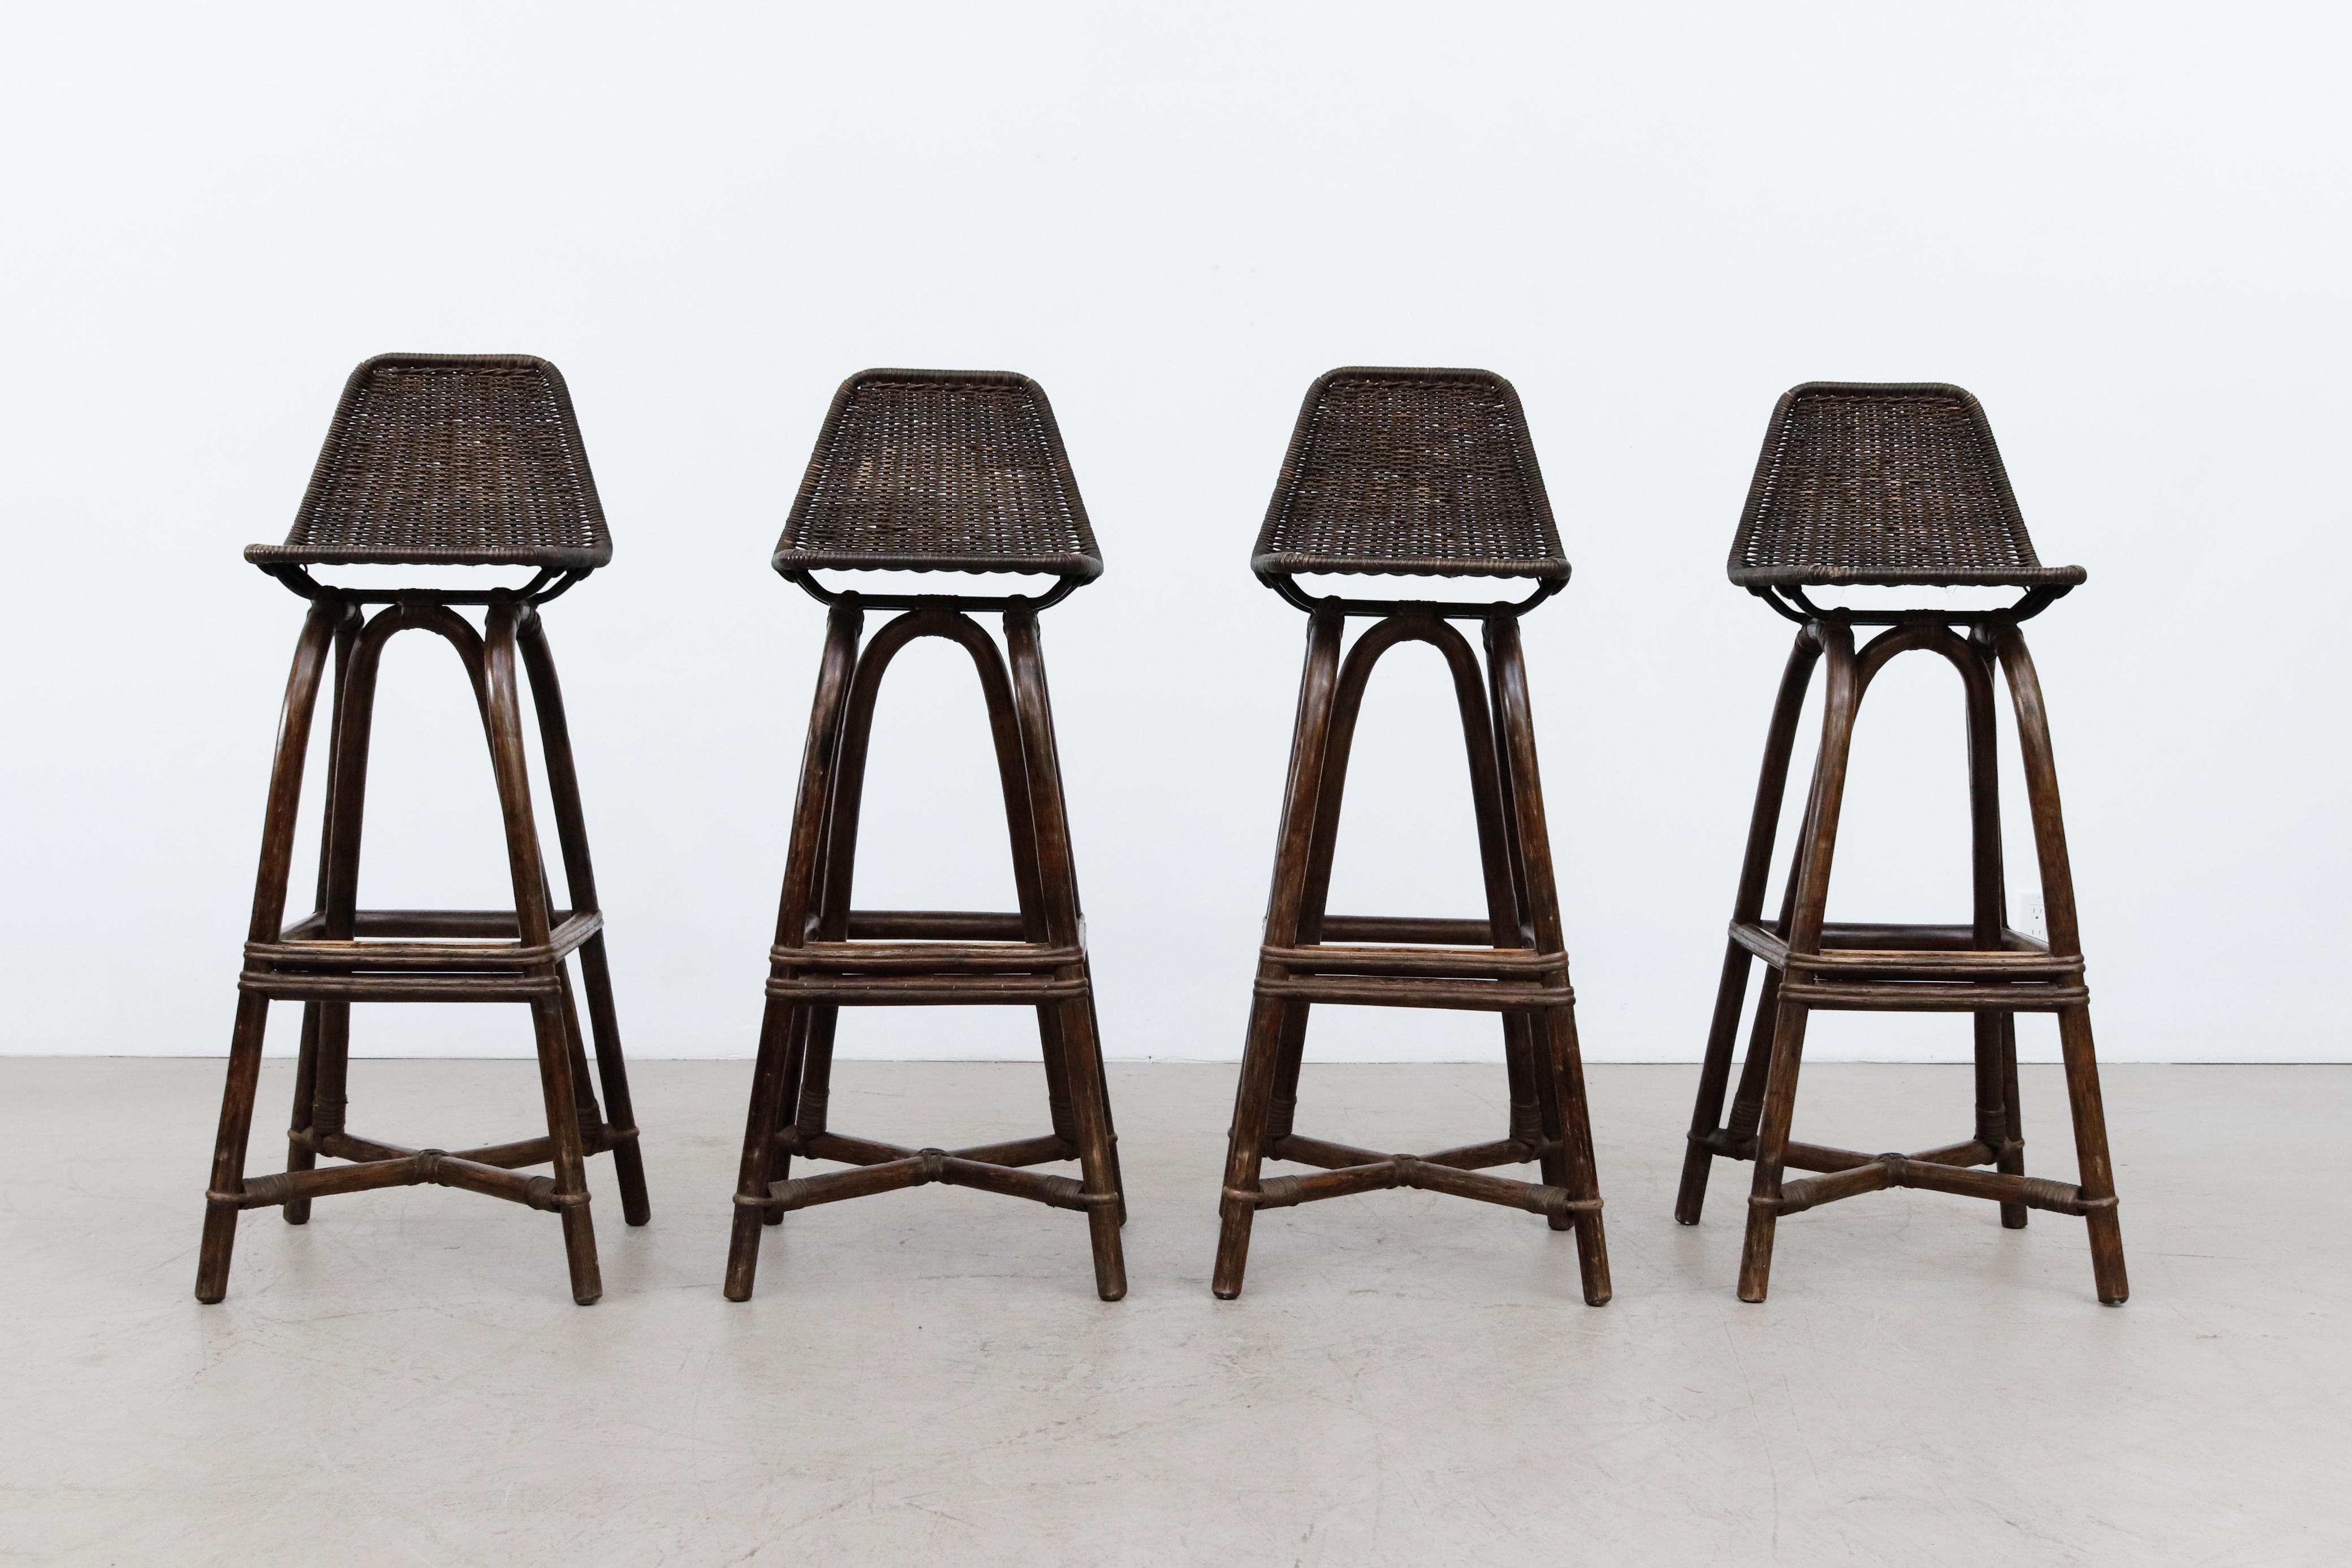 Set of 4 tall mid-century black stained bamboo bar stools inspired by Charlotte Perriand. In original condition with wear consistent with their age and use. Seat height is 35.25